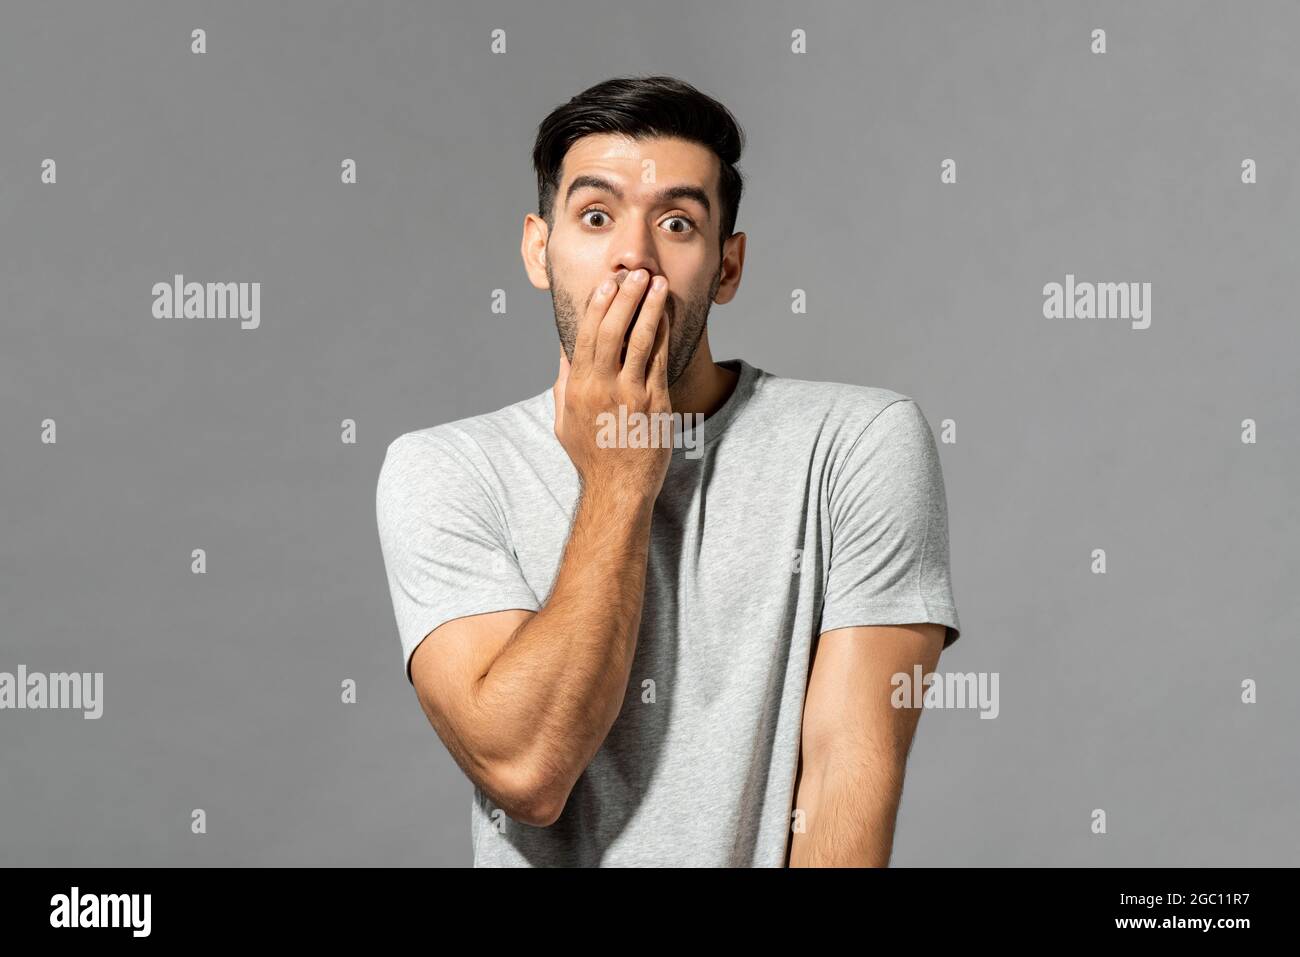 Portrait of shocked young Caucasian man with hand covering mouth on light gray studio background Stock Photo